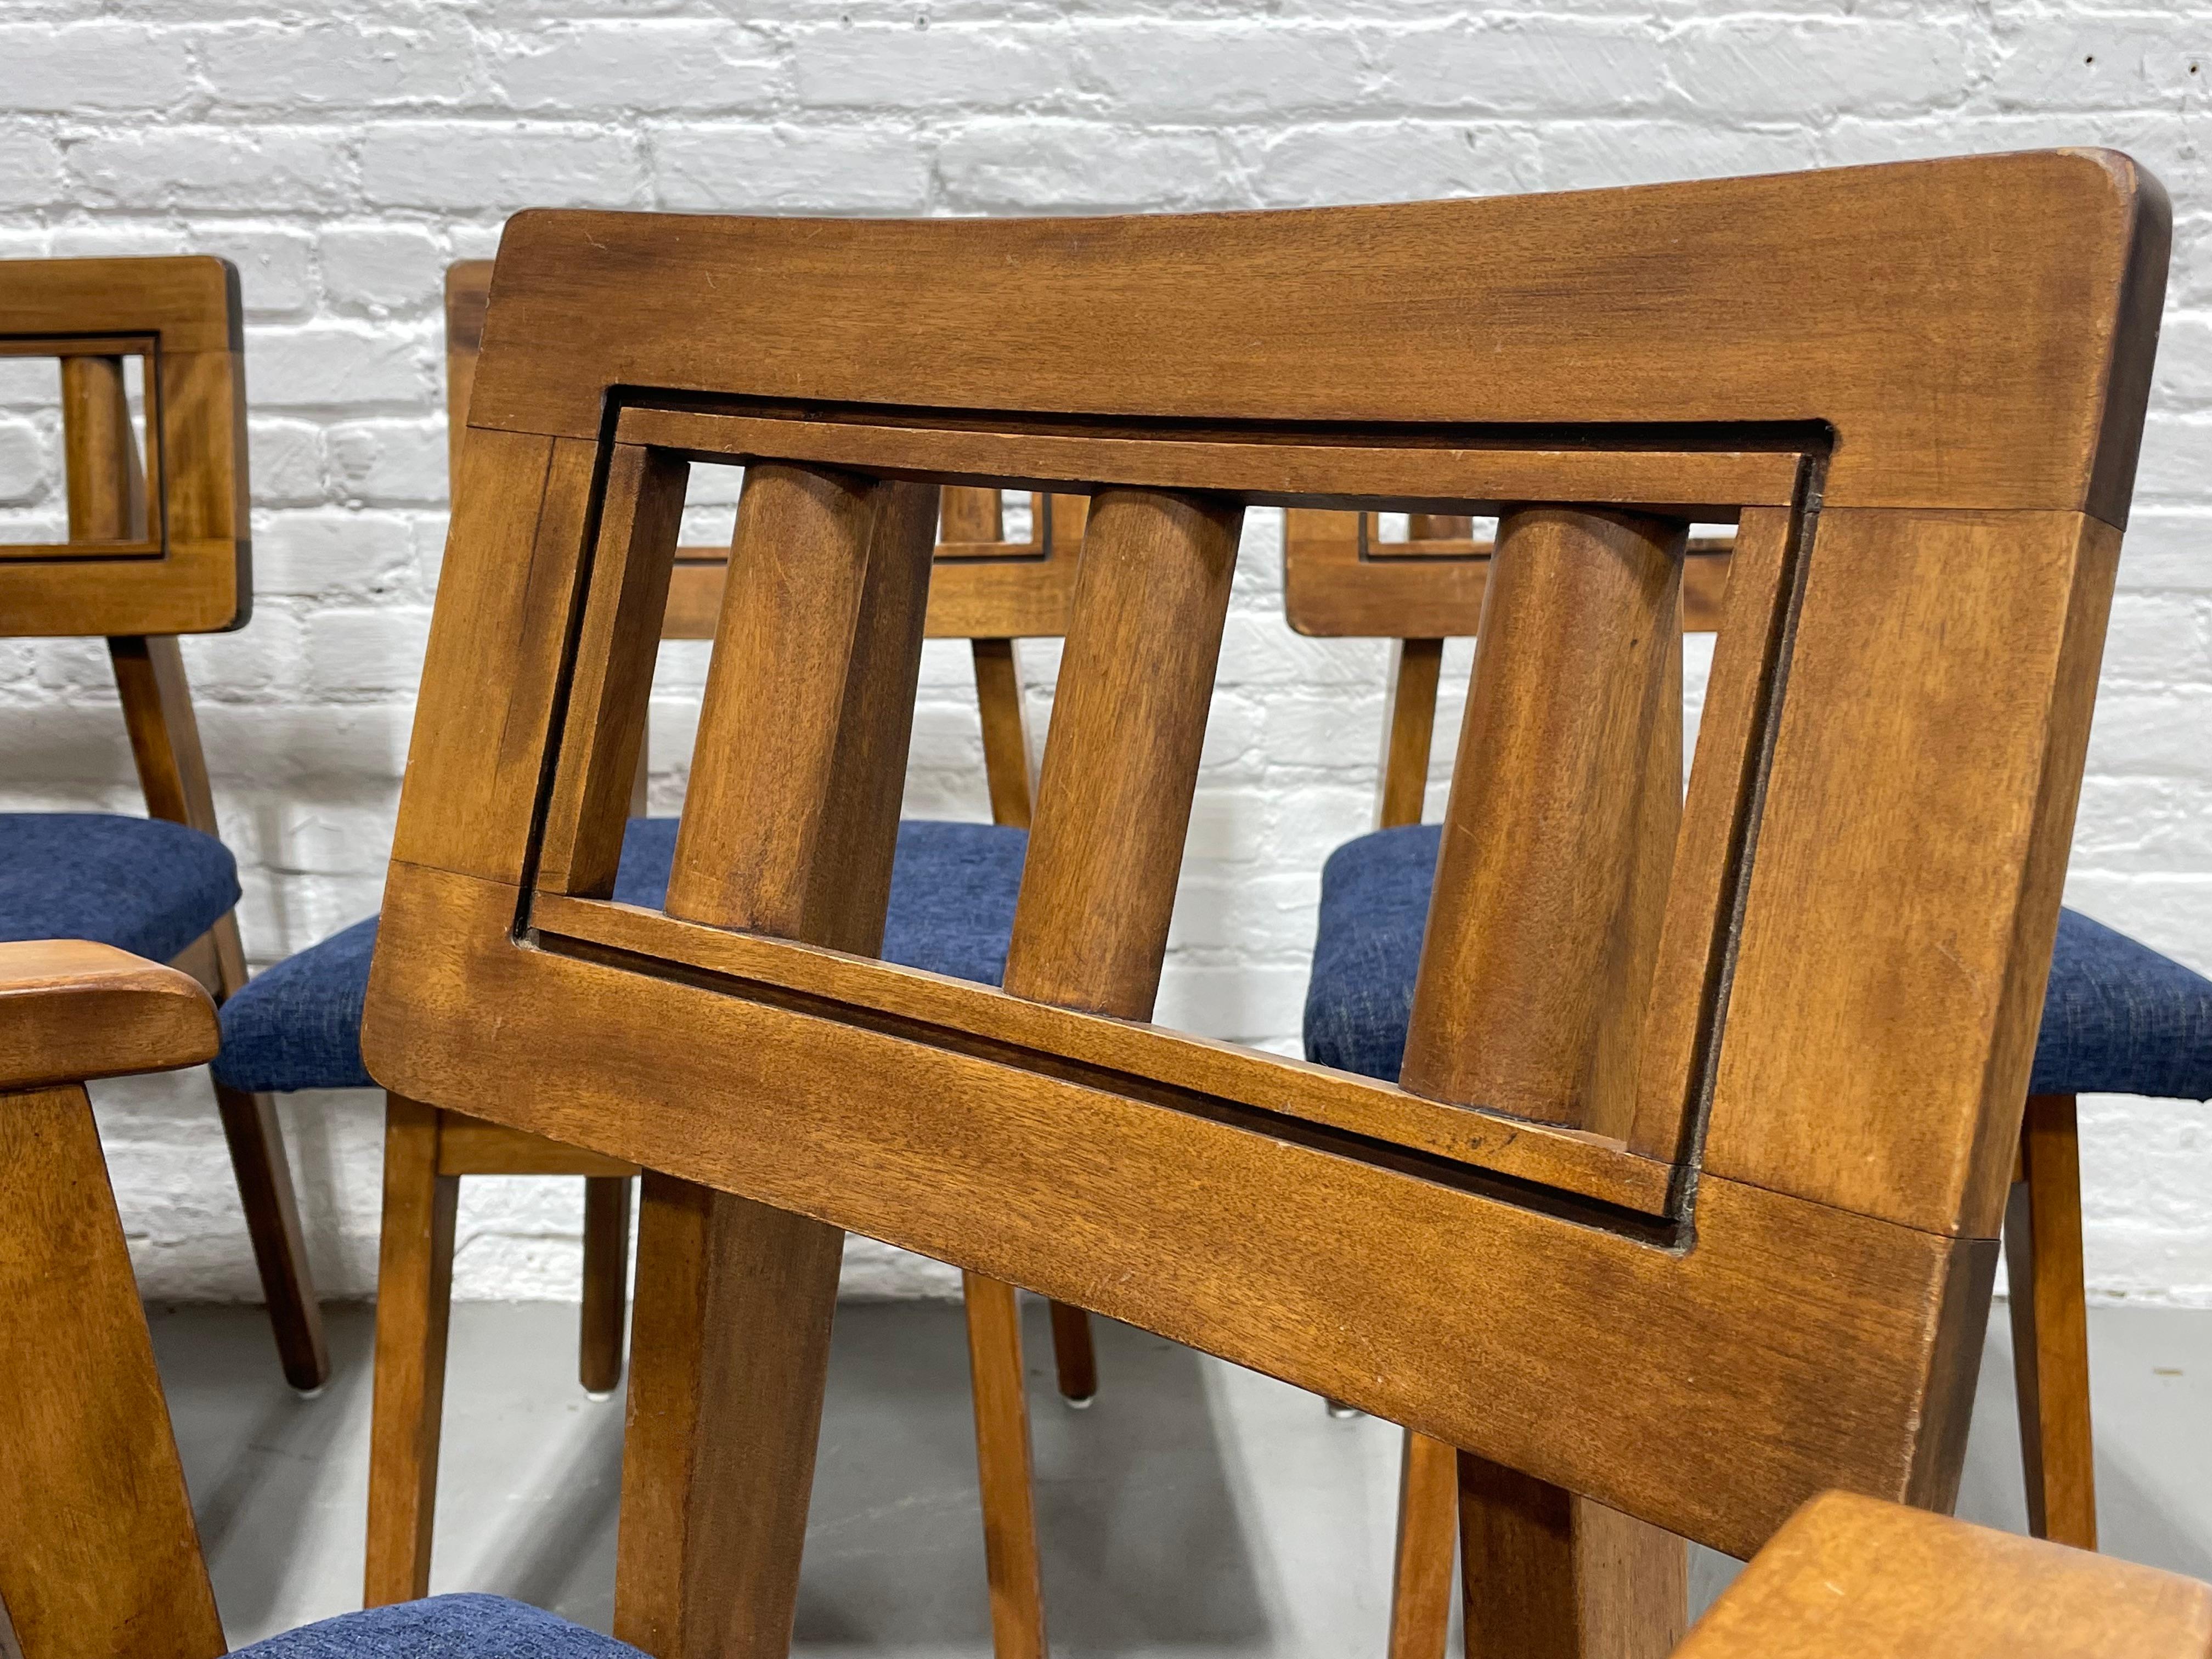 Mid-Century Modern Walnut Dining Chairs + New Denim Upholstery, Set/6 In Good Condition For Sale In Weehawken, NJ